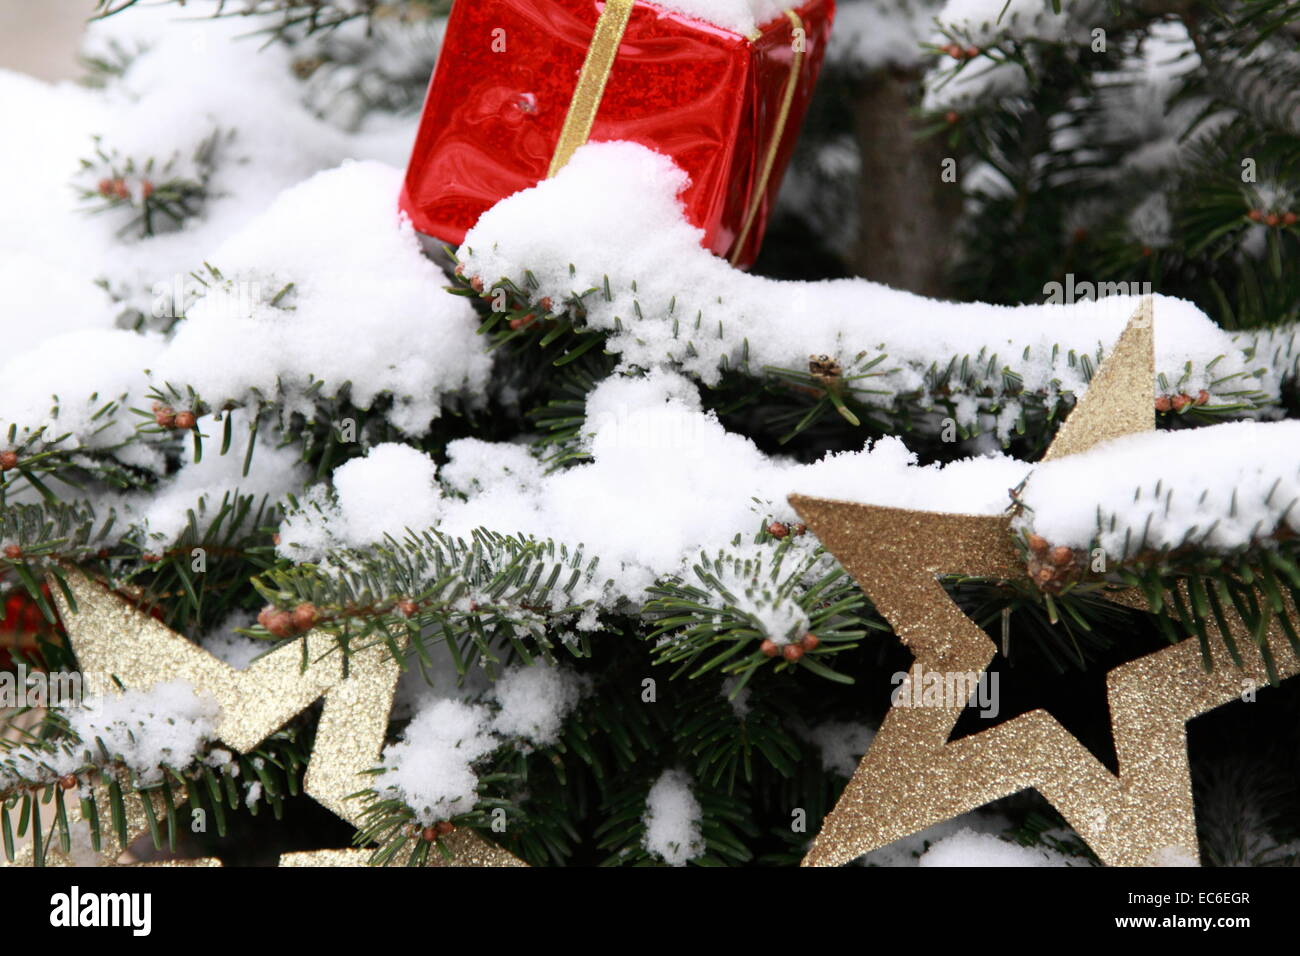 Christmas tree decorations in snow Stock Photo